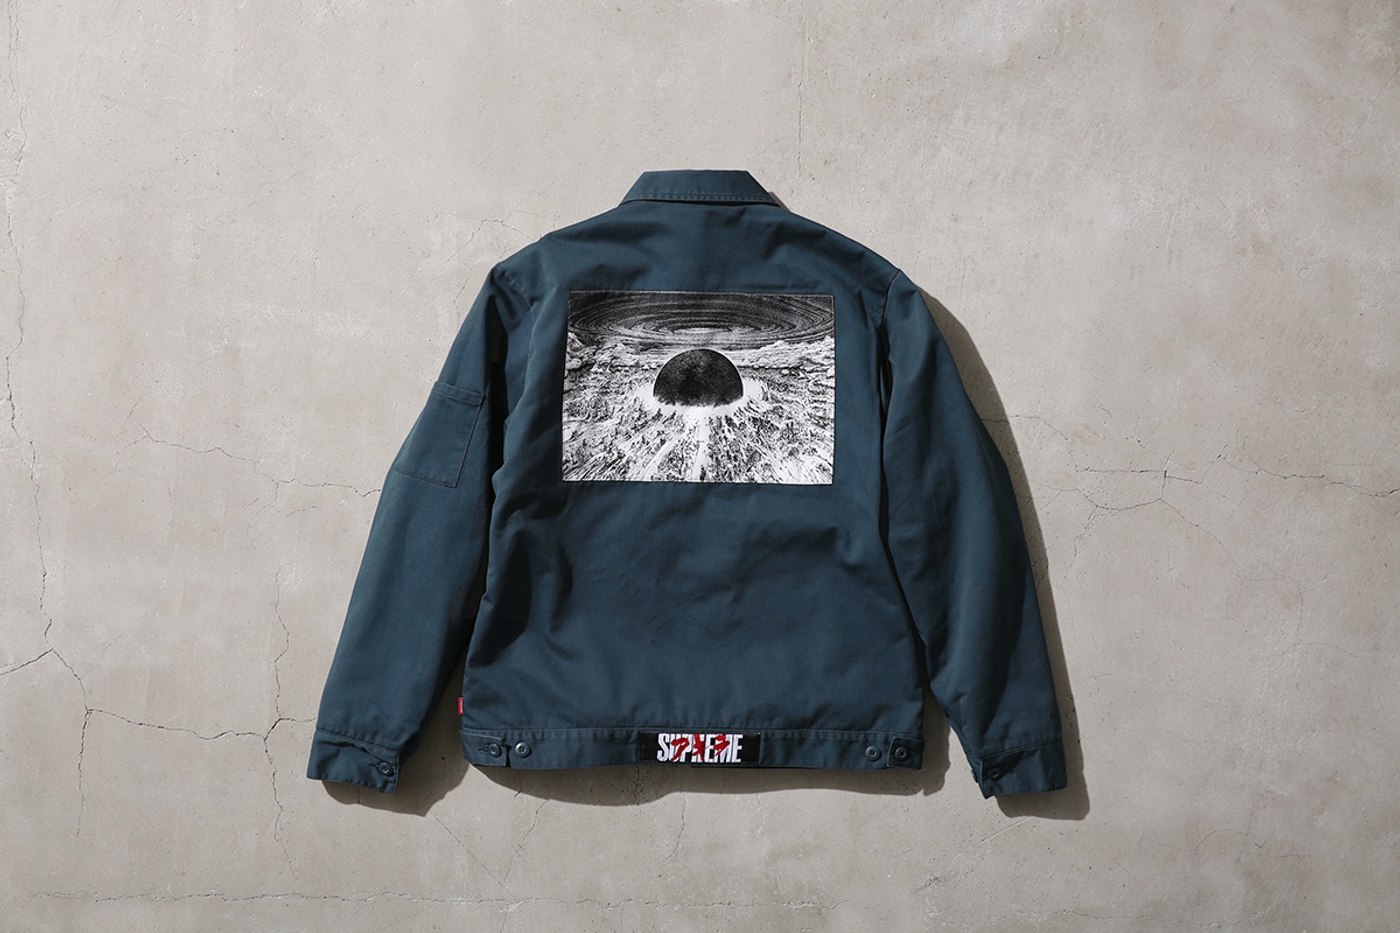 Work Jacket with woven patches. (14/40)